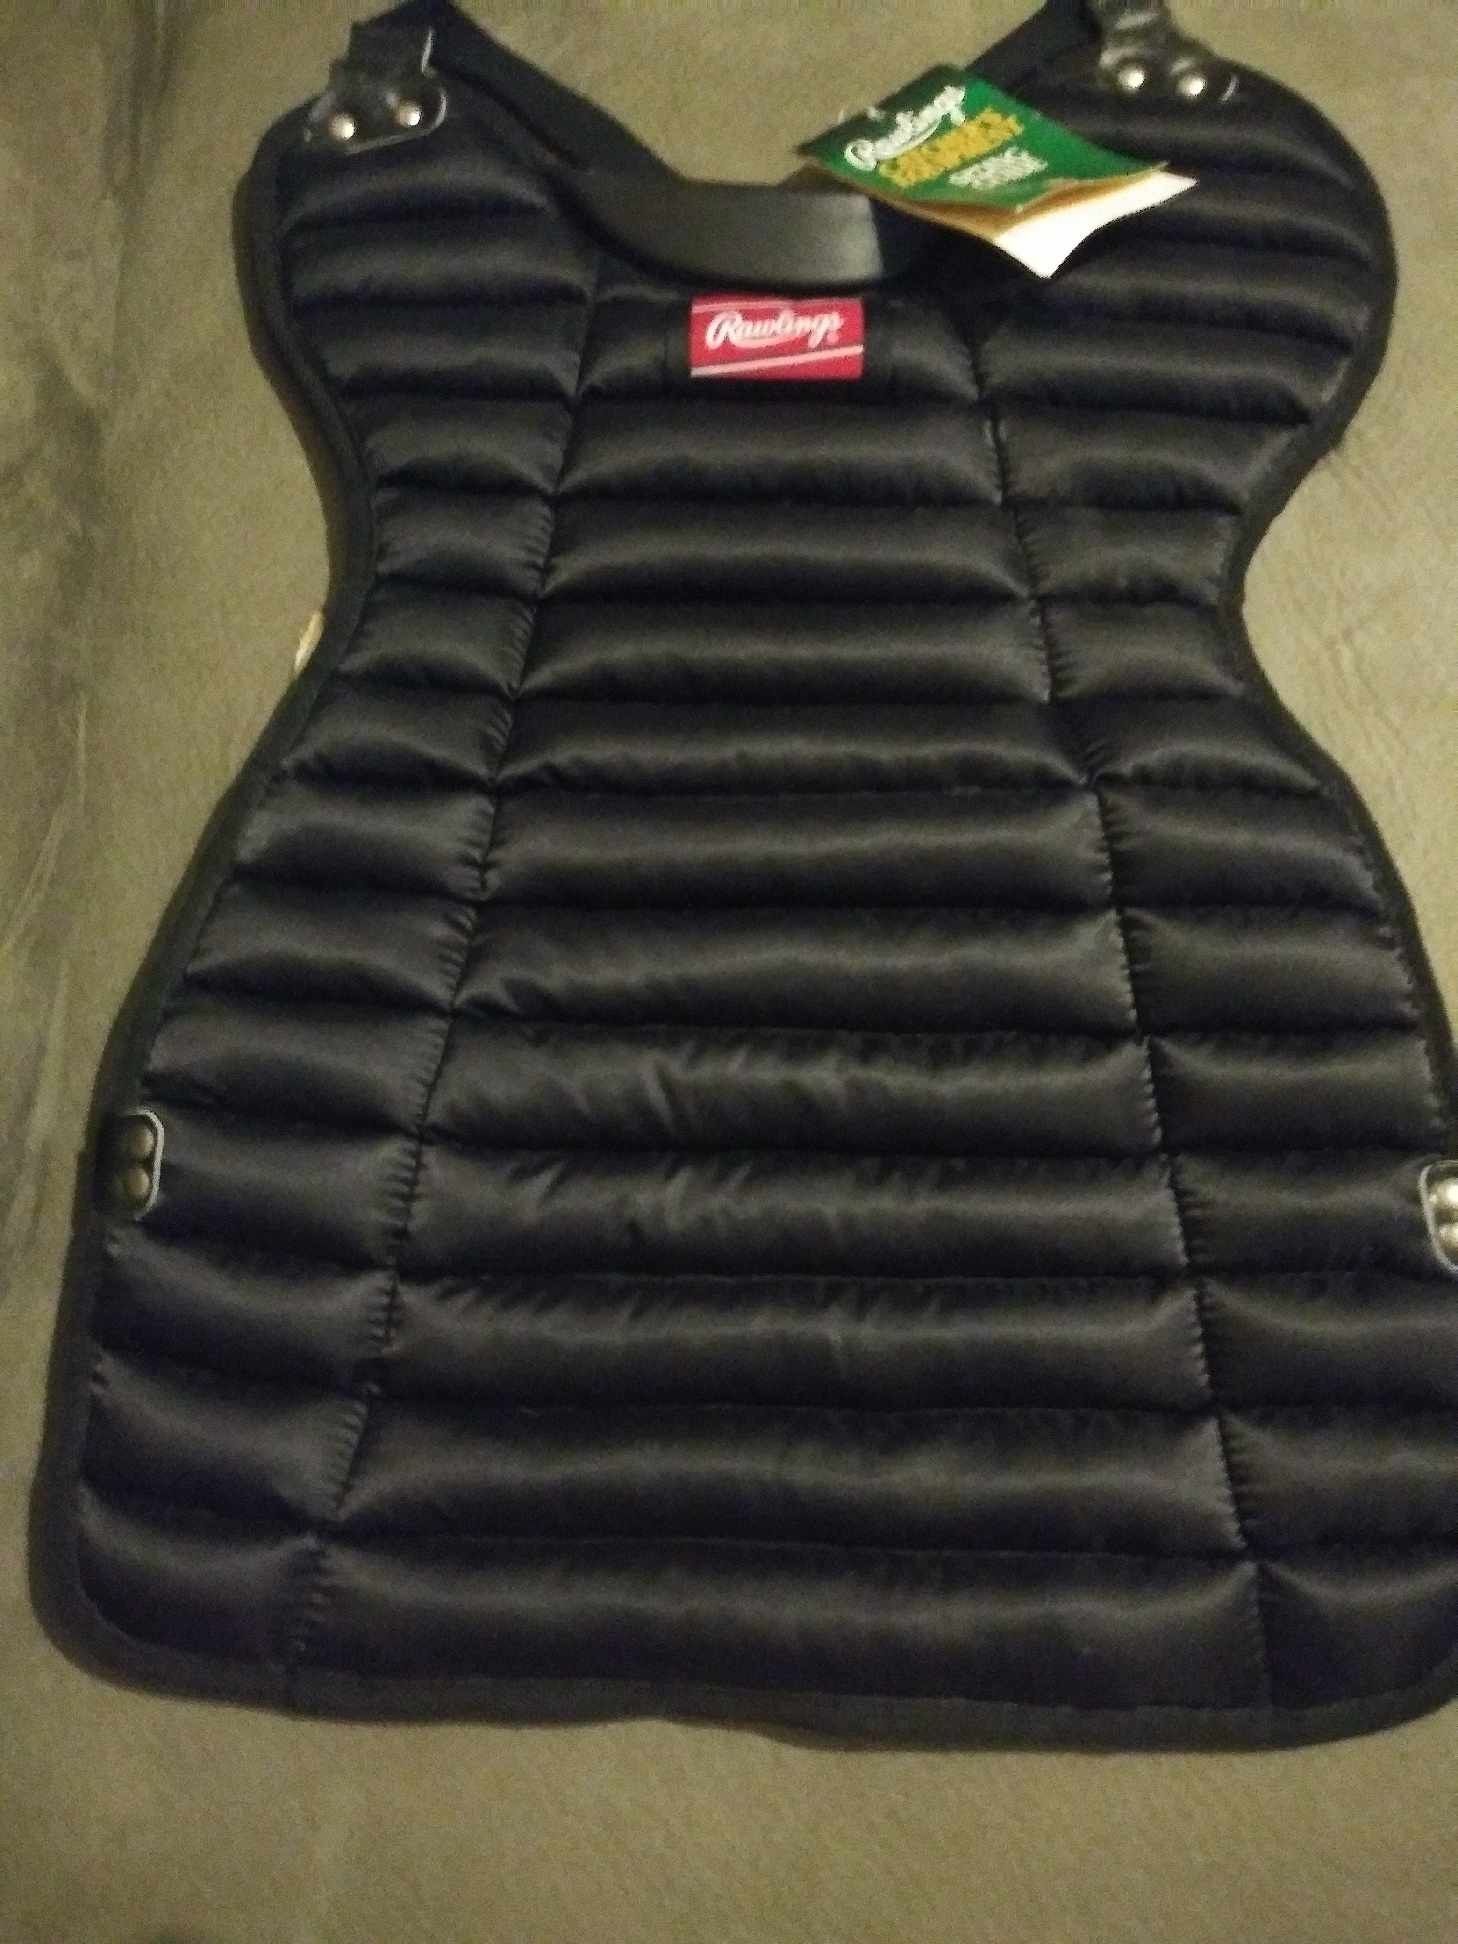 Rawlings catchers equipment protector vest